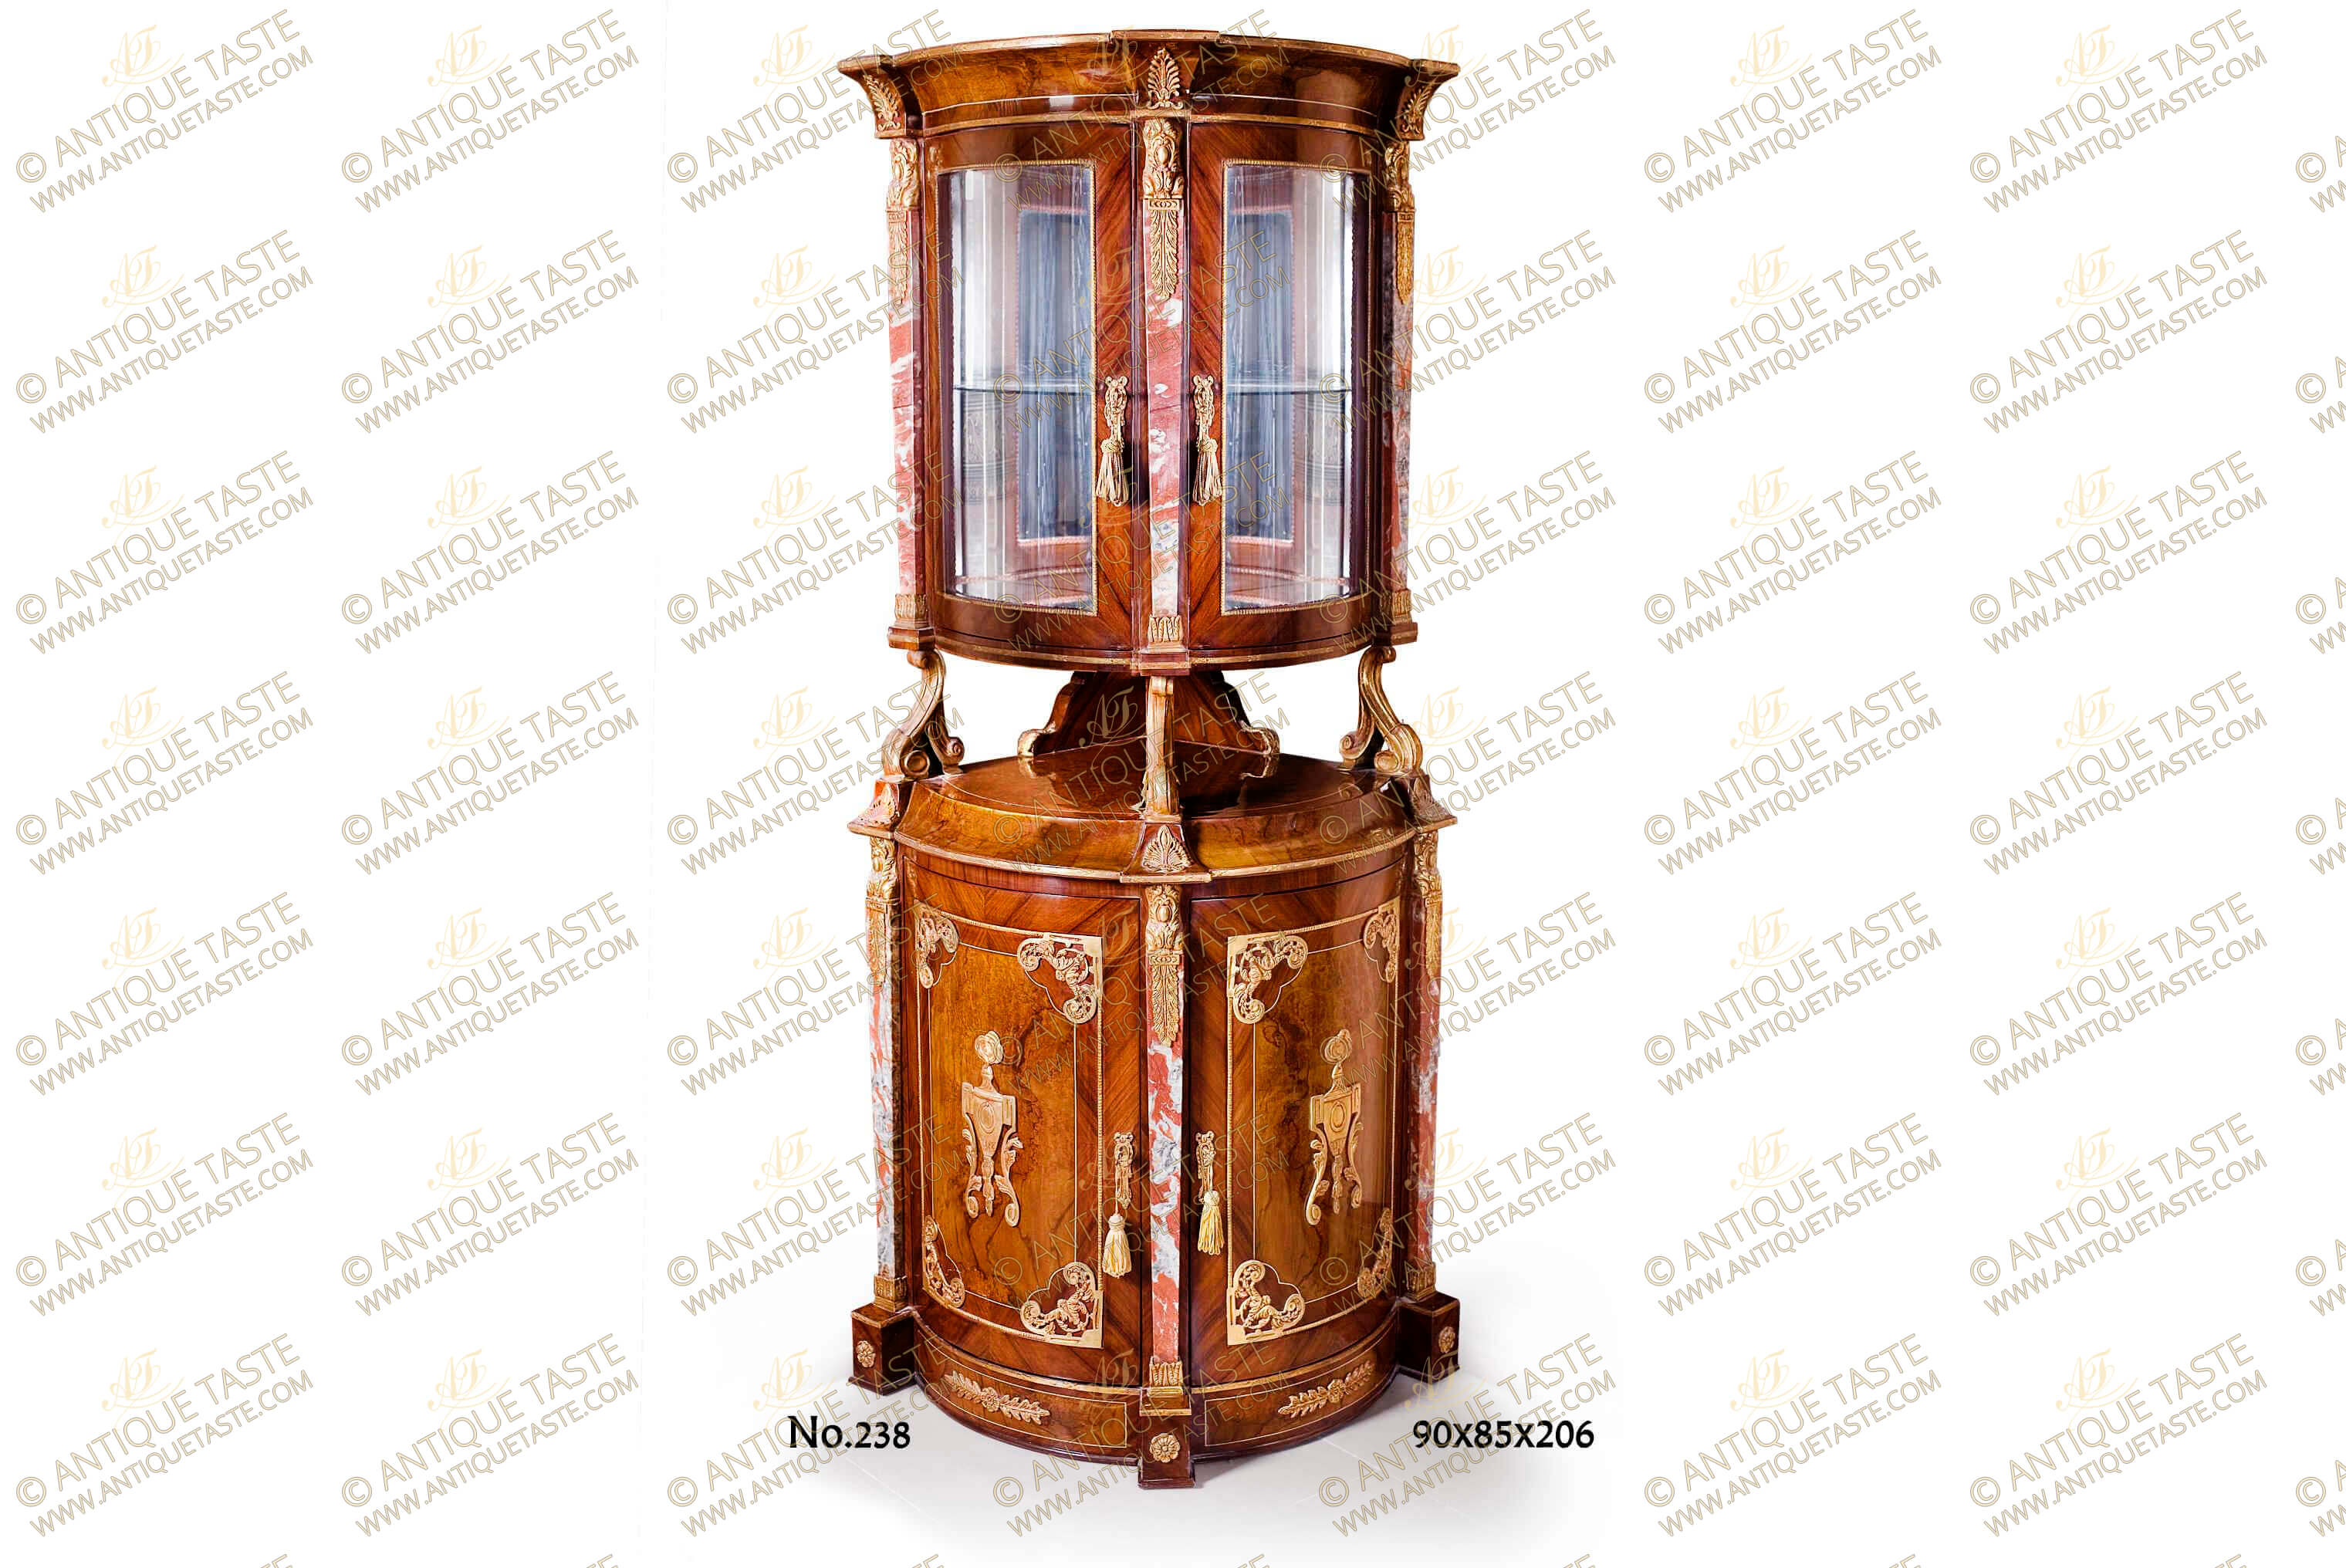 French style Vitrine, Louis XV Display Cabinet, Louis XVI Corner Furniture  Reproductions